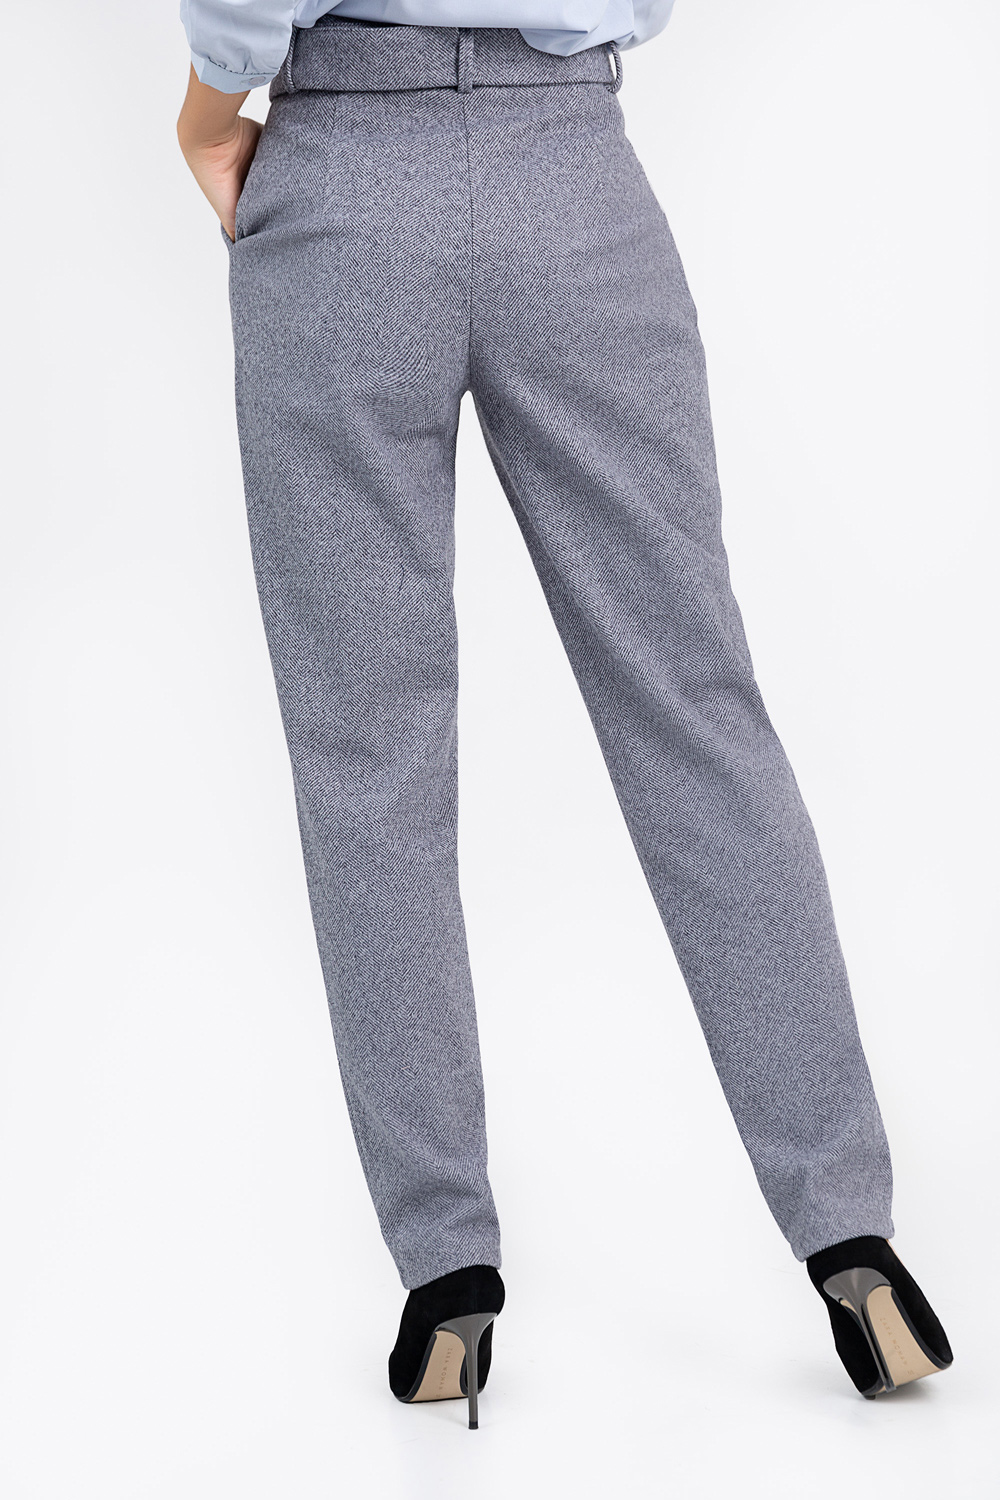 Warm gray trousers with a belt